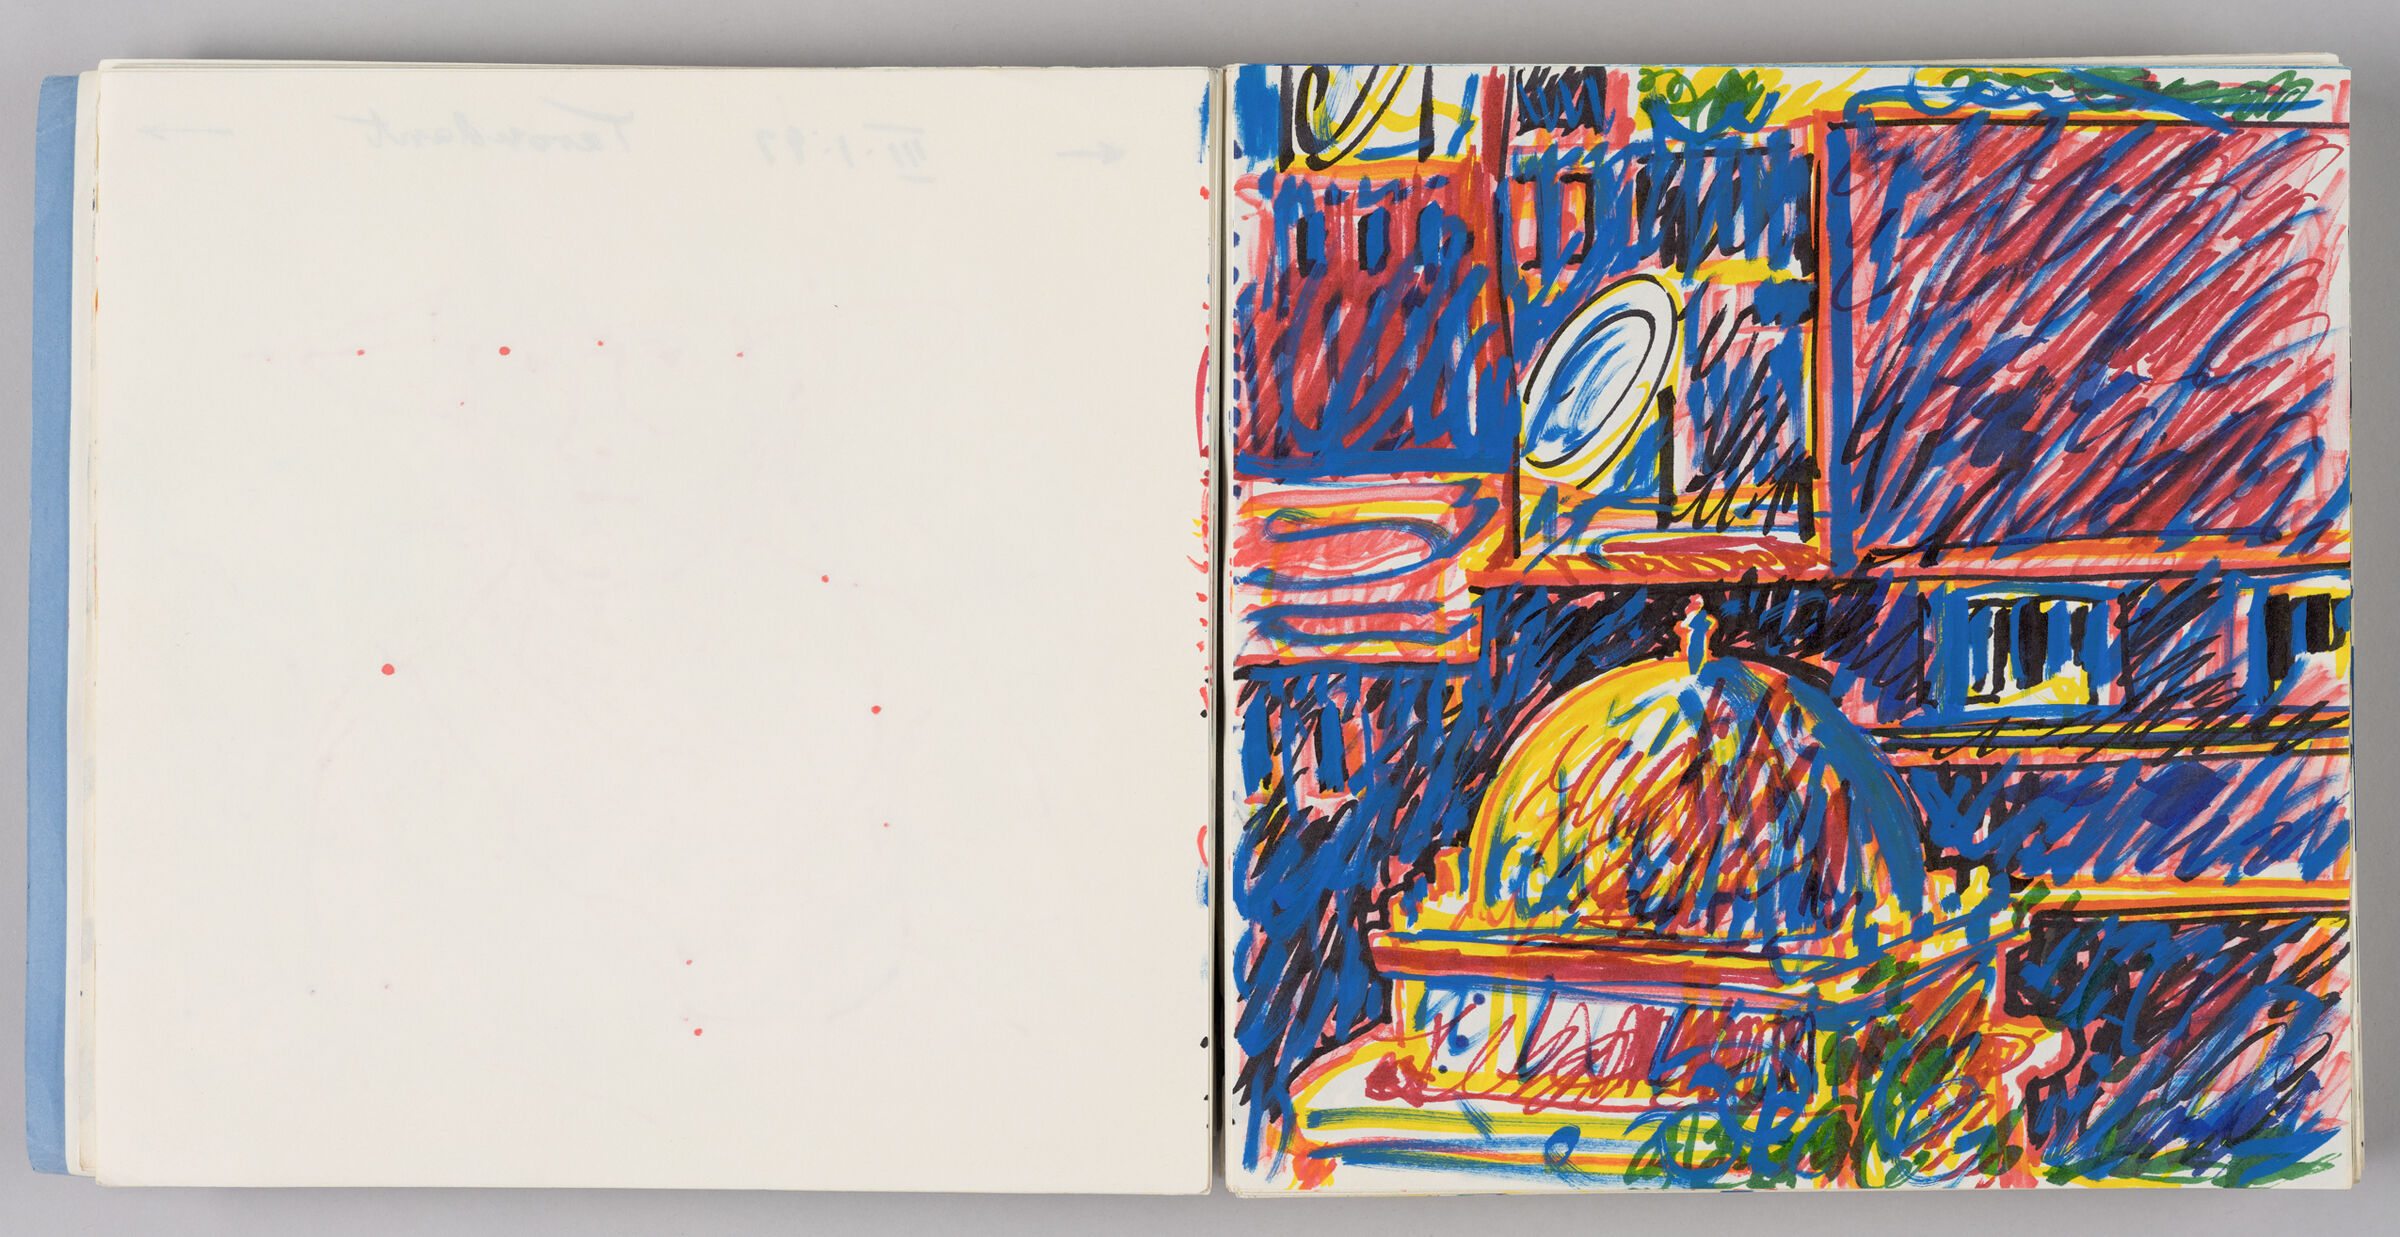 Untitled (Bleed-Through Of Previous Page And Color Transfer, Left Page); Untitled (View Of Taroudant, Right Page)
